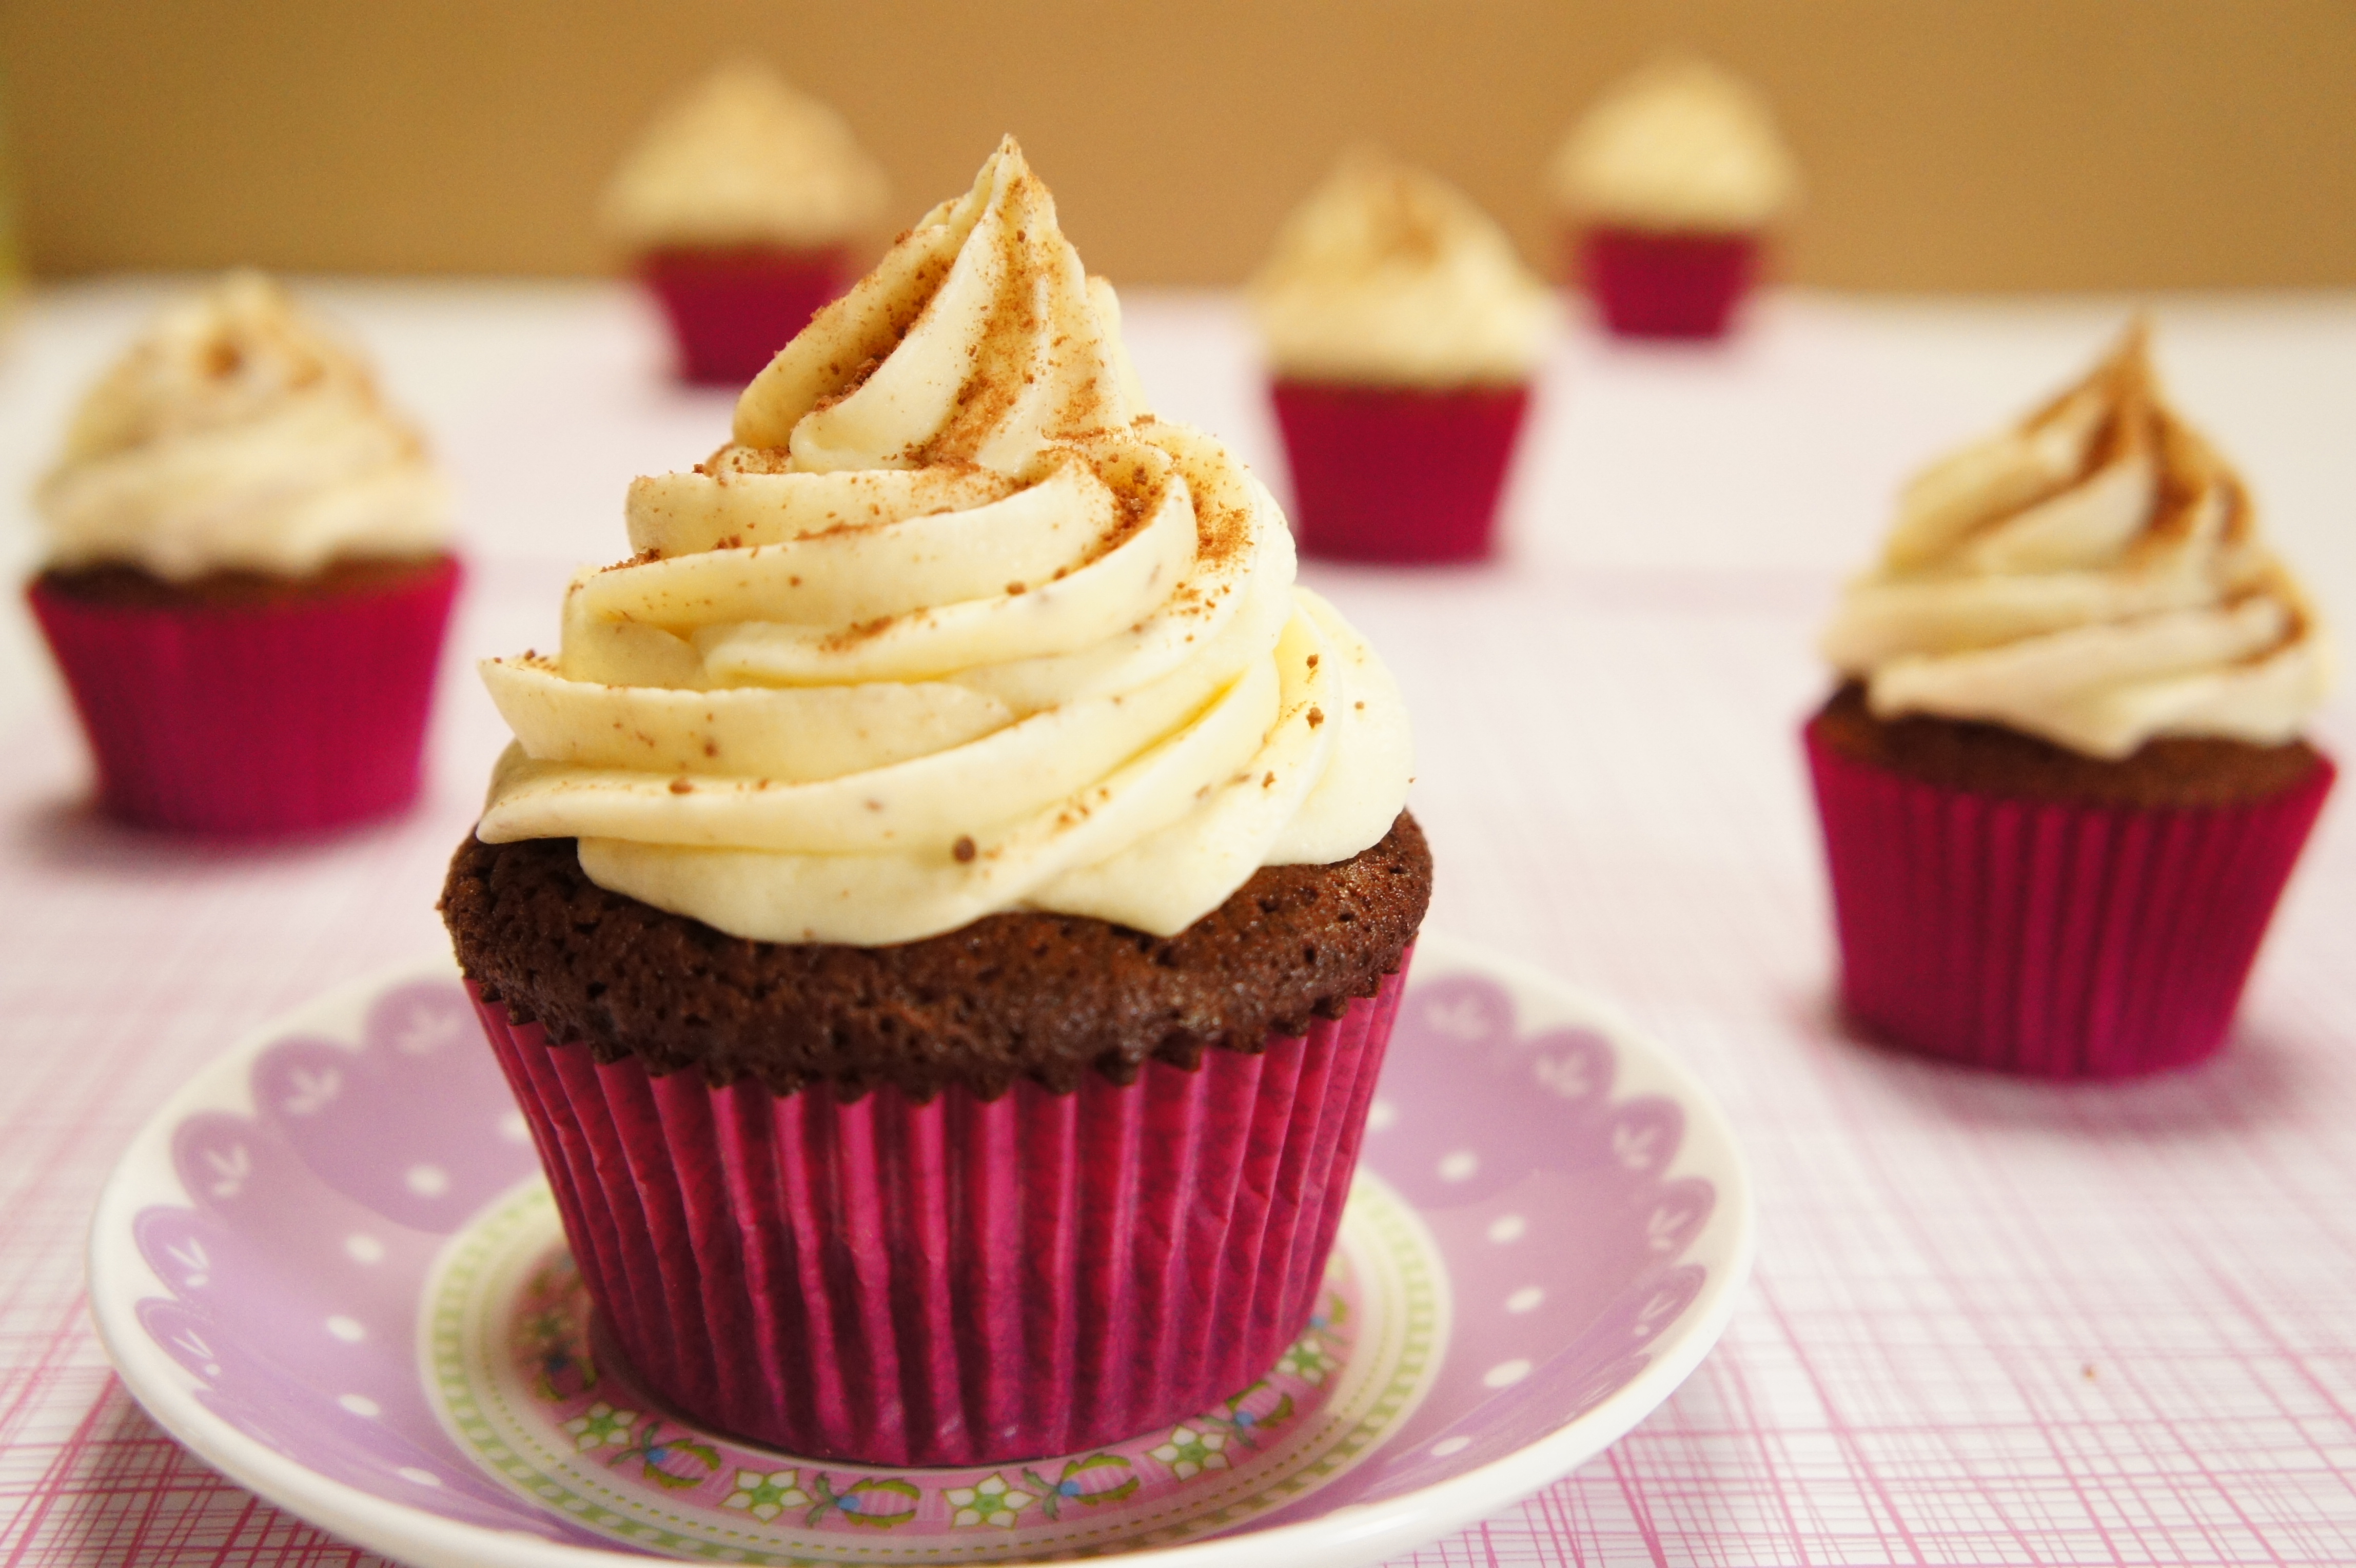 How do you make caramel frosting from condensed milk?